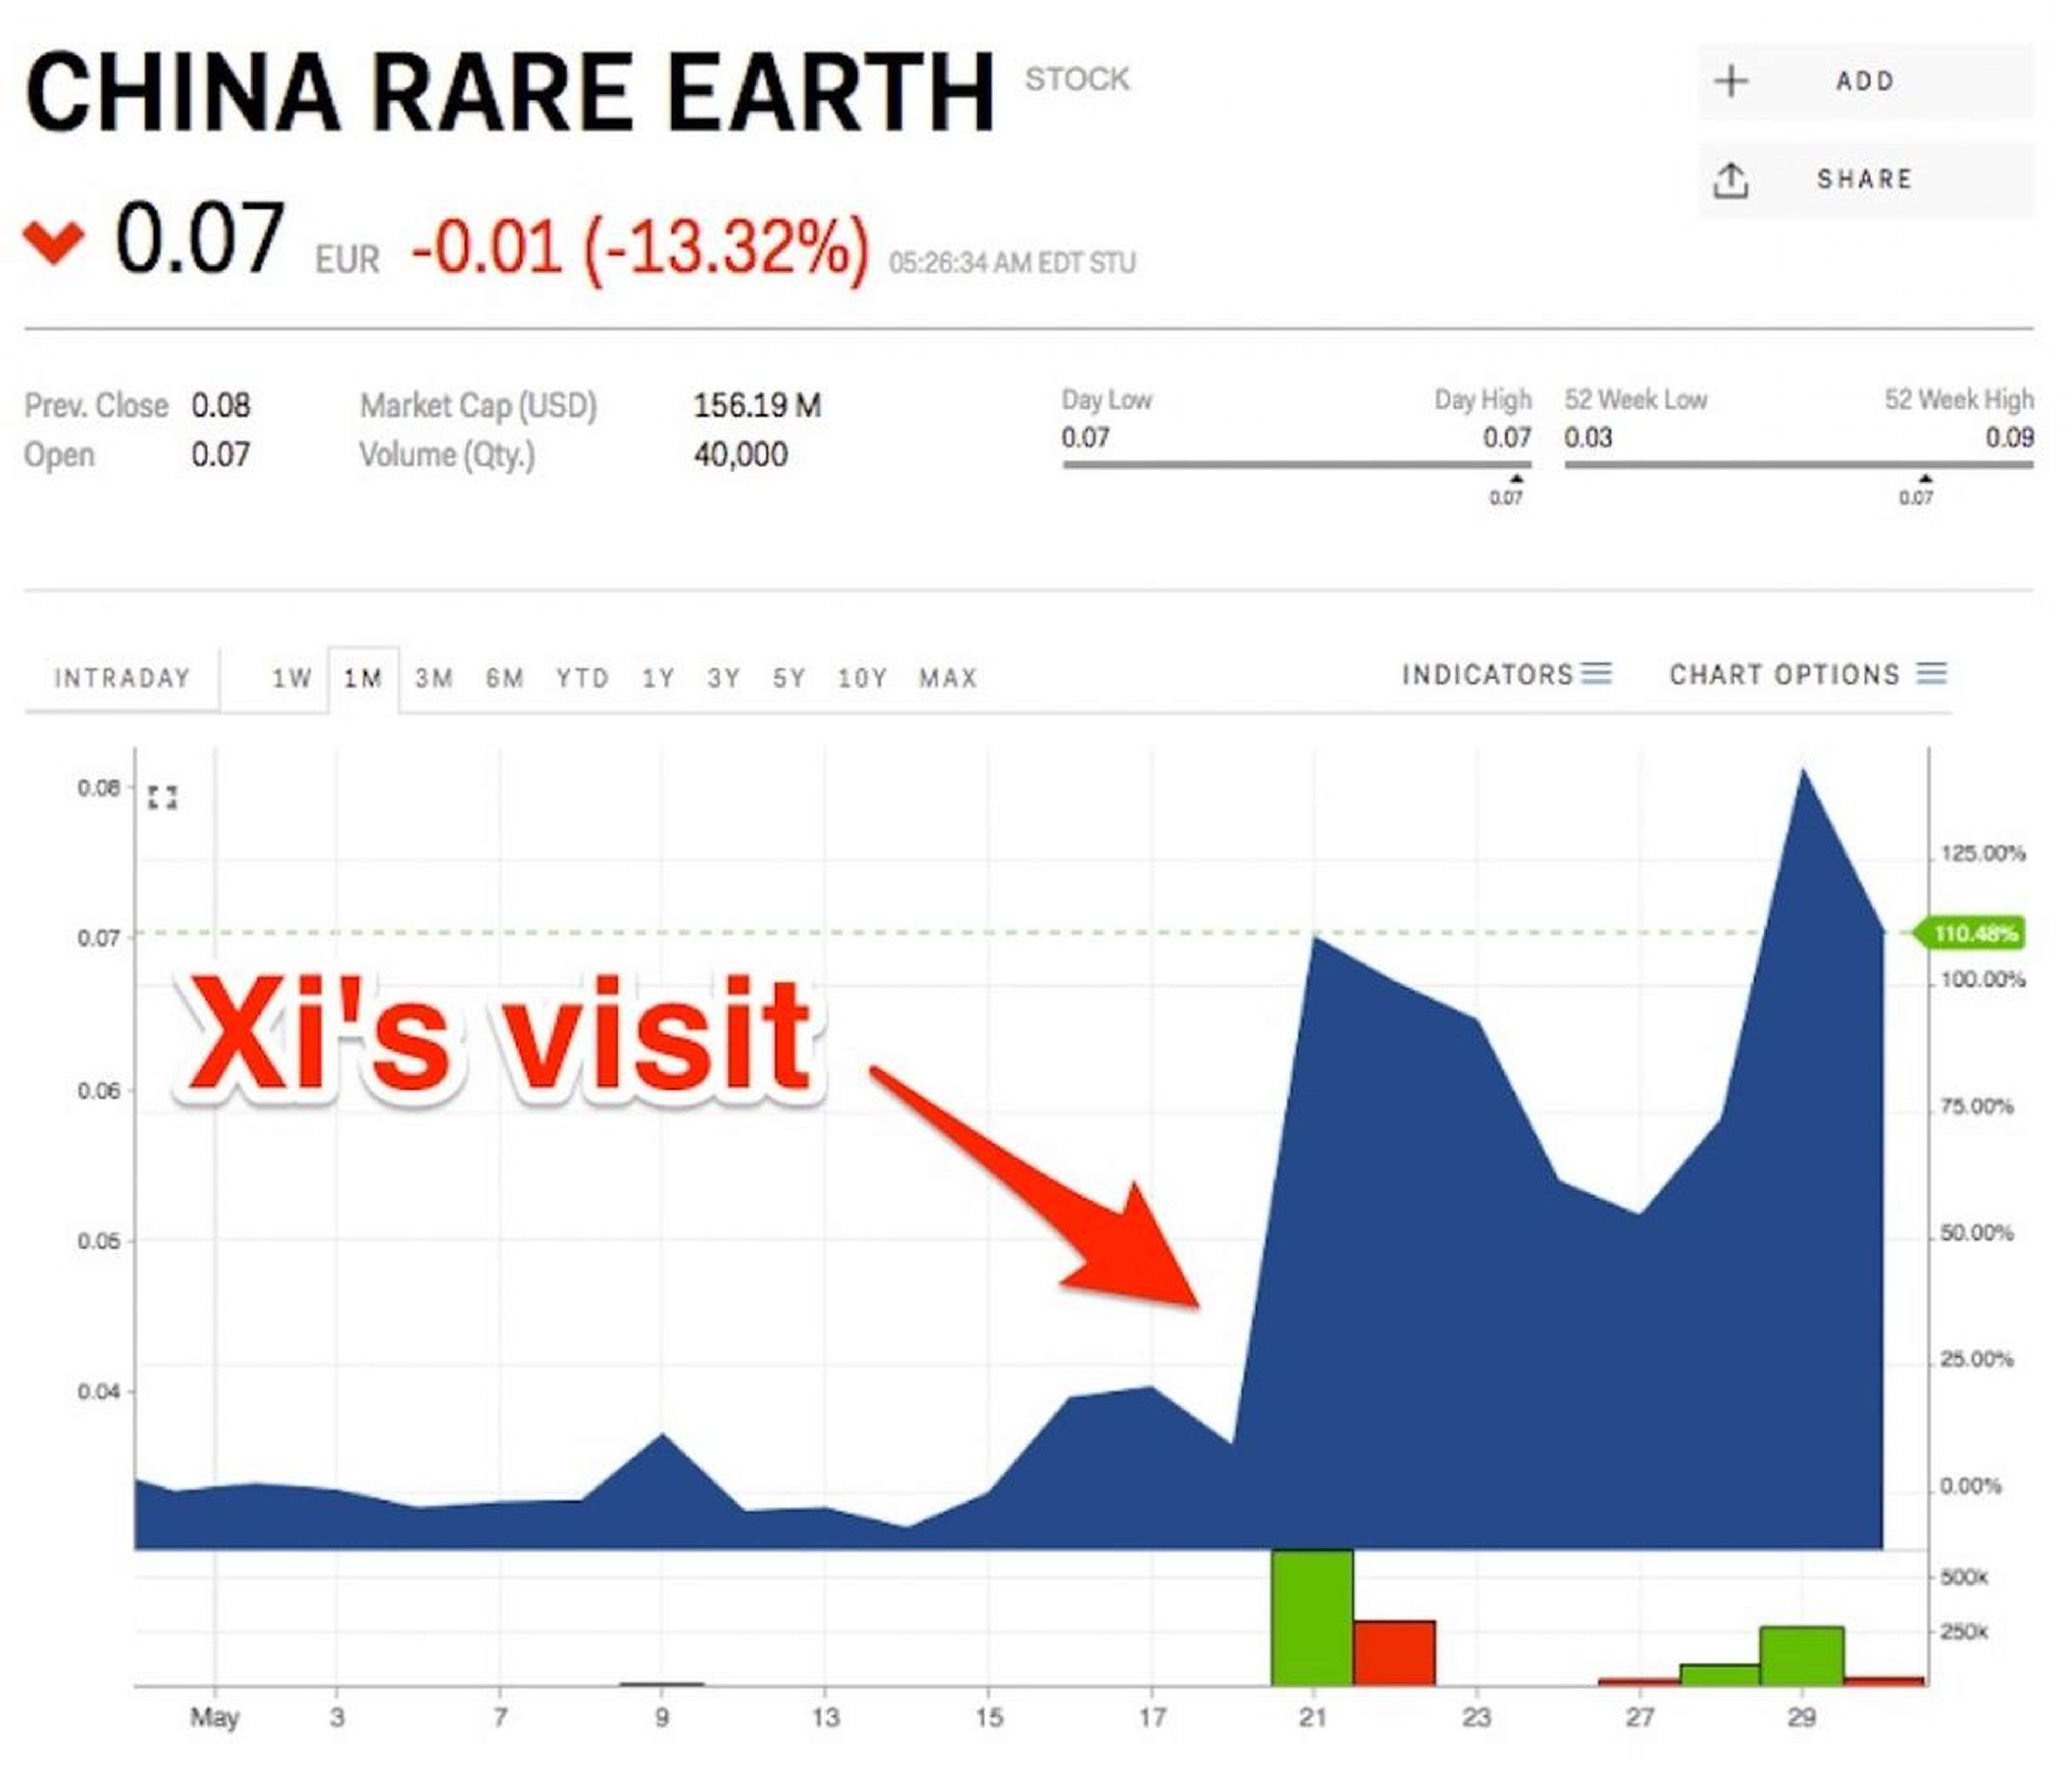 Shares in China Rare Earth Holdings skyrocketed after Xi's visit to a rare-earth factory in eastern China on May 20.